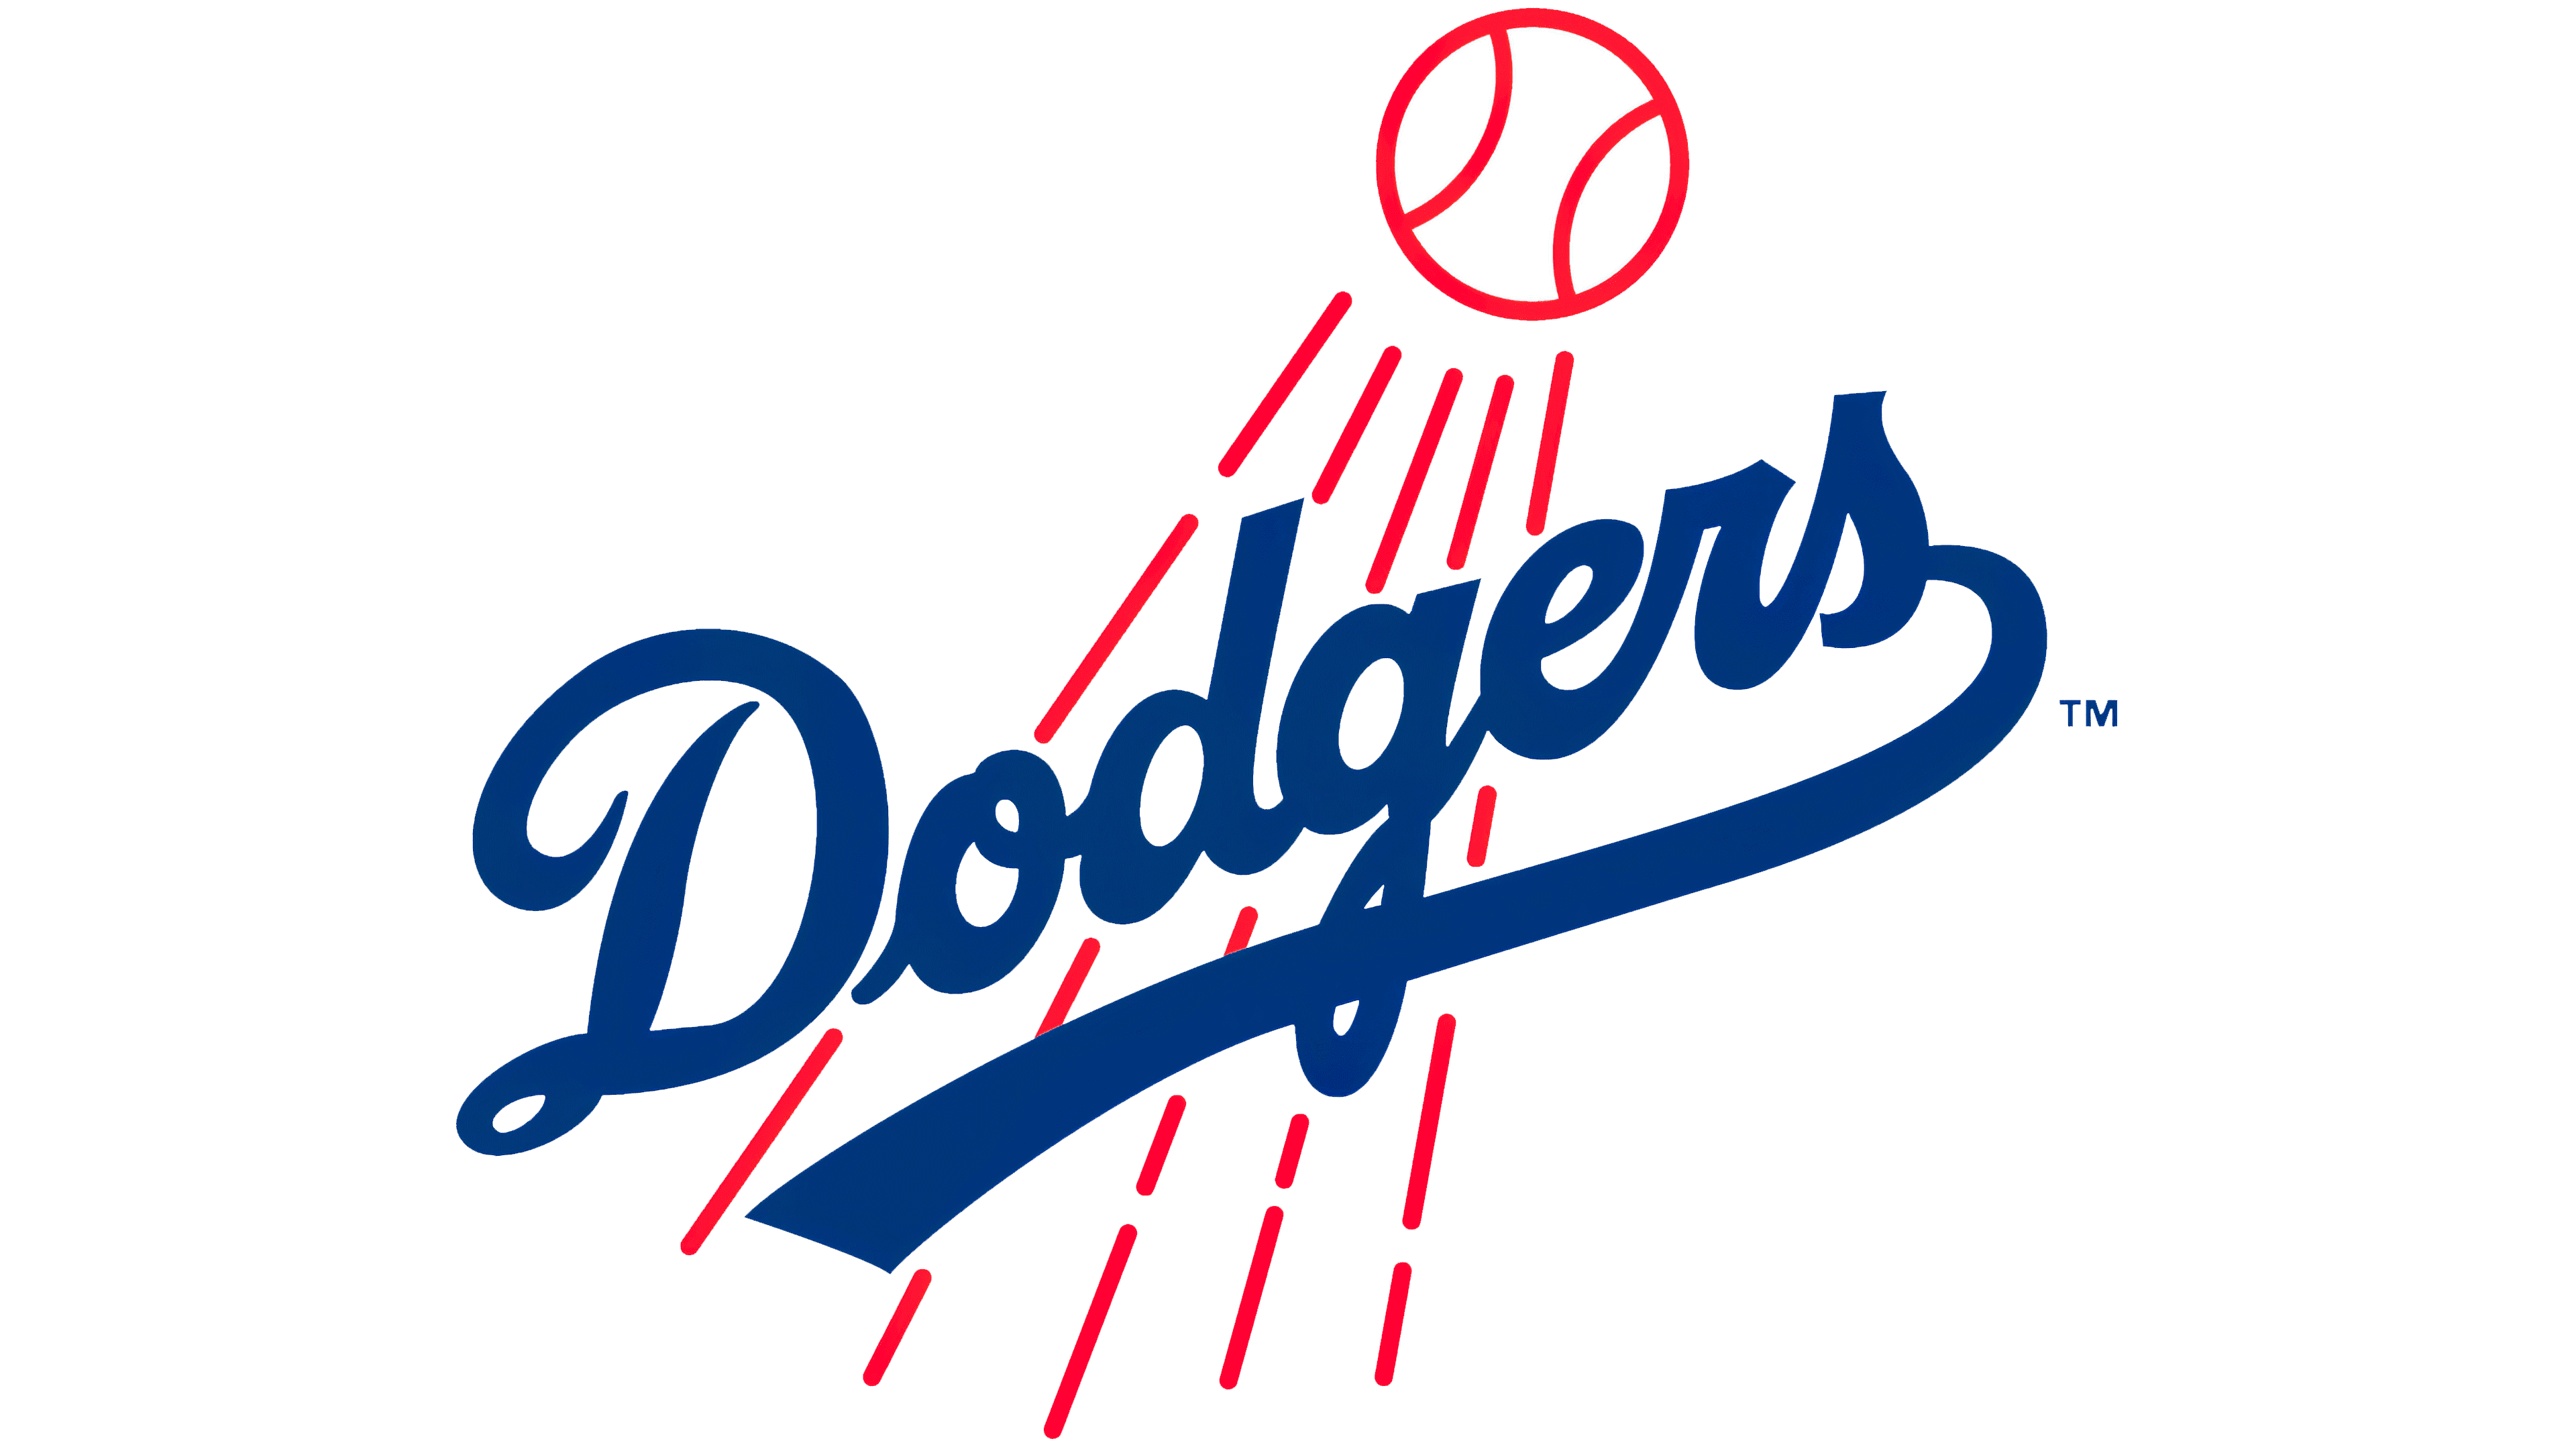 los angeles dodgers logo history the most famous brands and company logos in the world los angeles dodgers logo history the